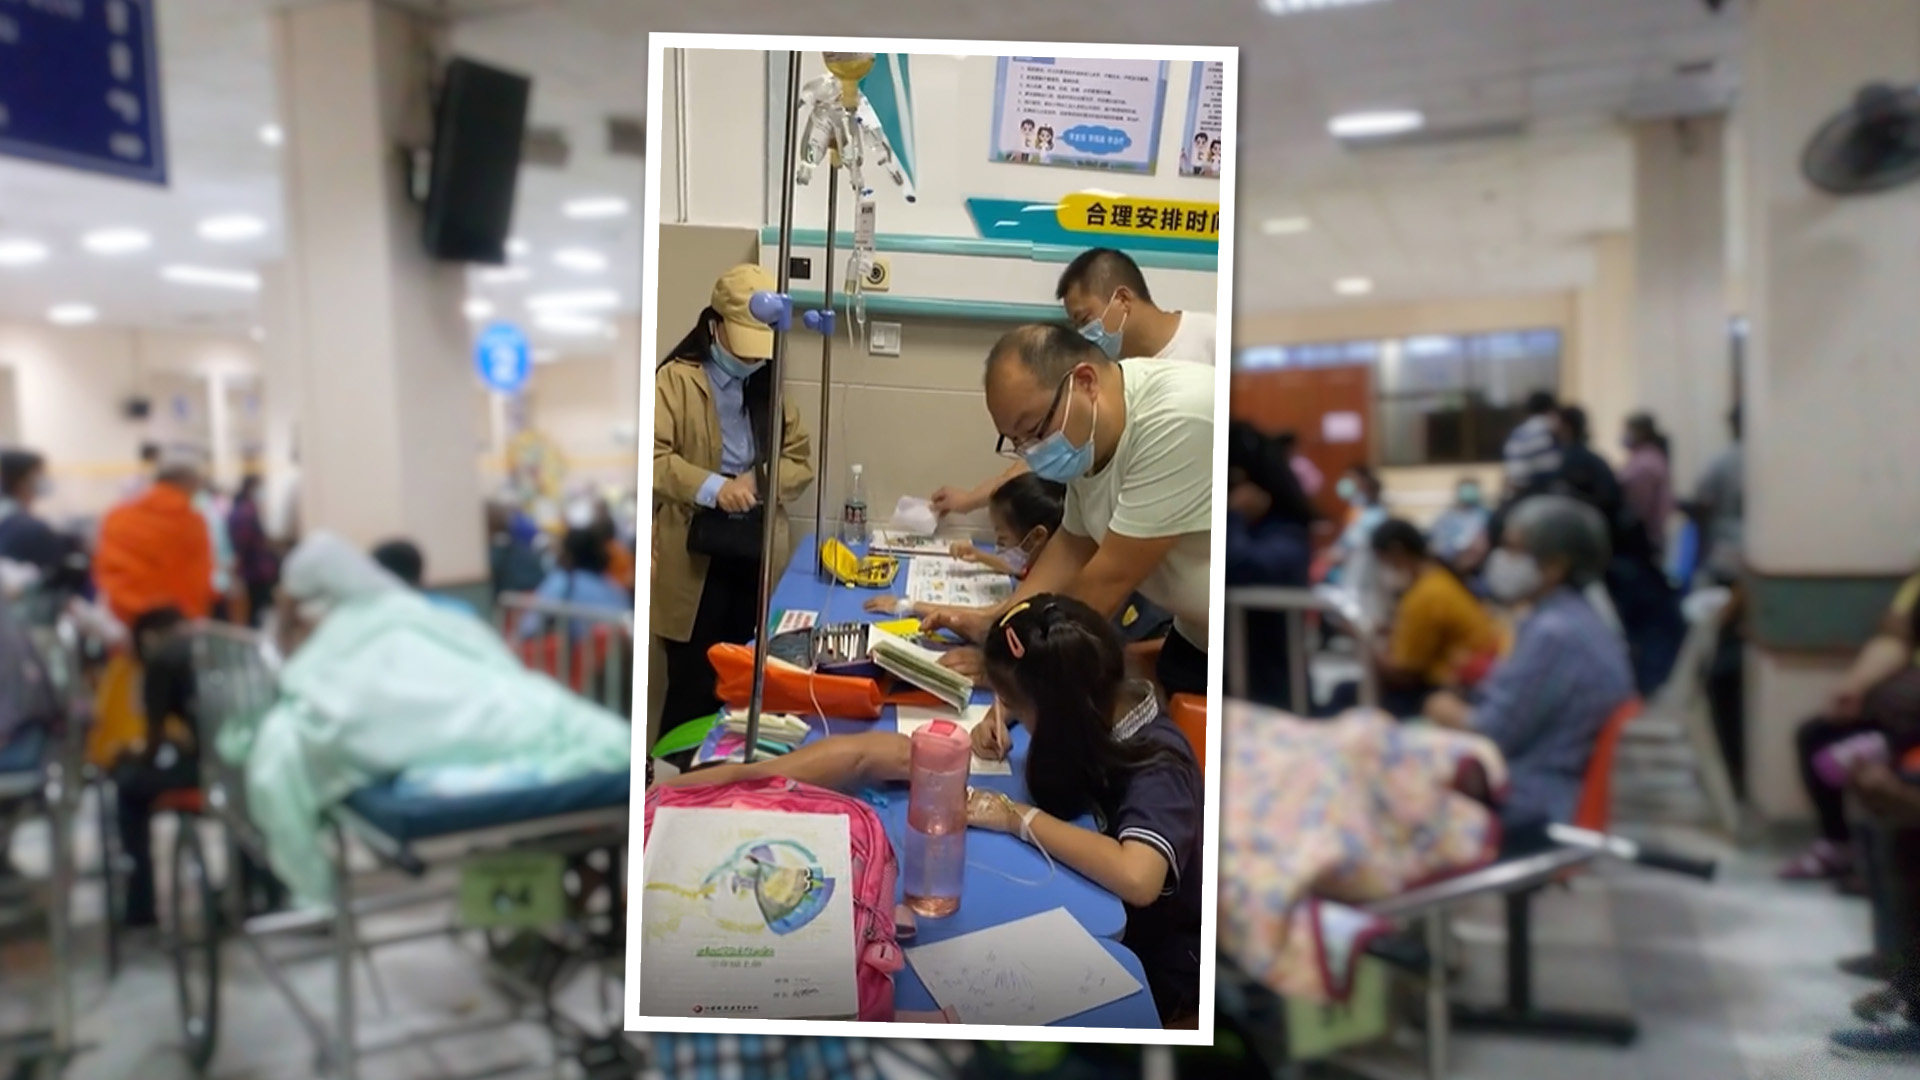 As China faces a seasonal outbreak of respiratory diseases, a move by hospitals to set up special “homework” zones for sick children has sparked a lively discussion on mainland social media. Photo: SCMP composite/Shutterstock/Douyin